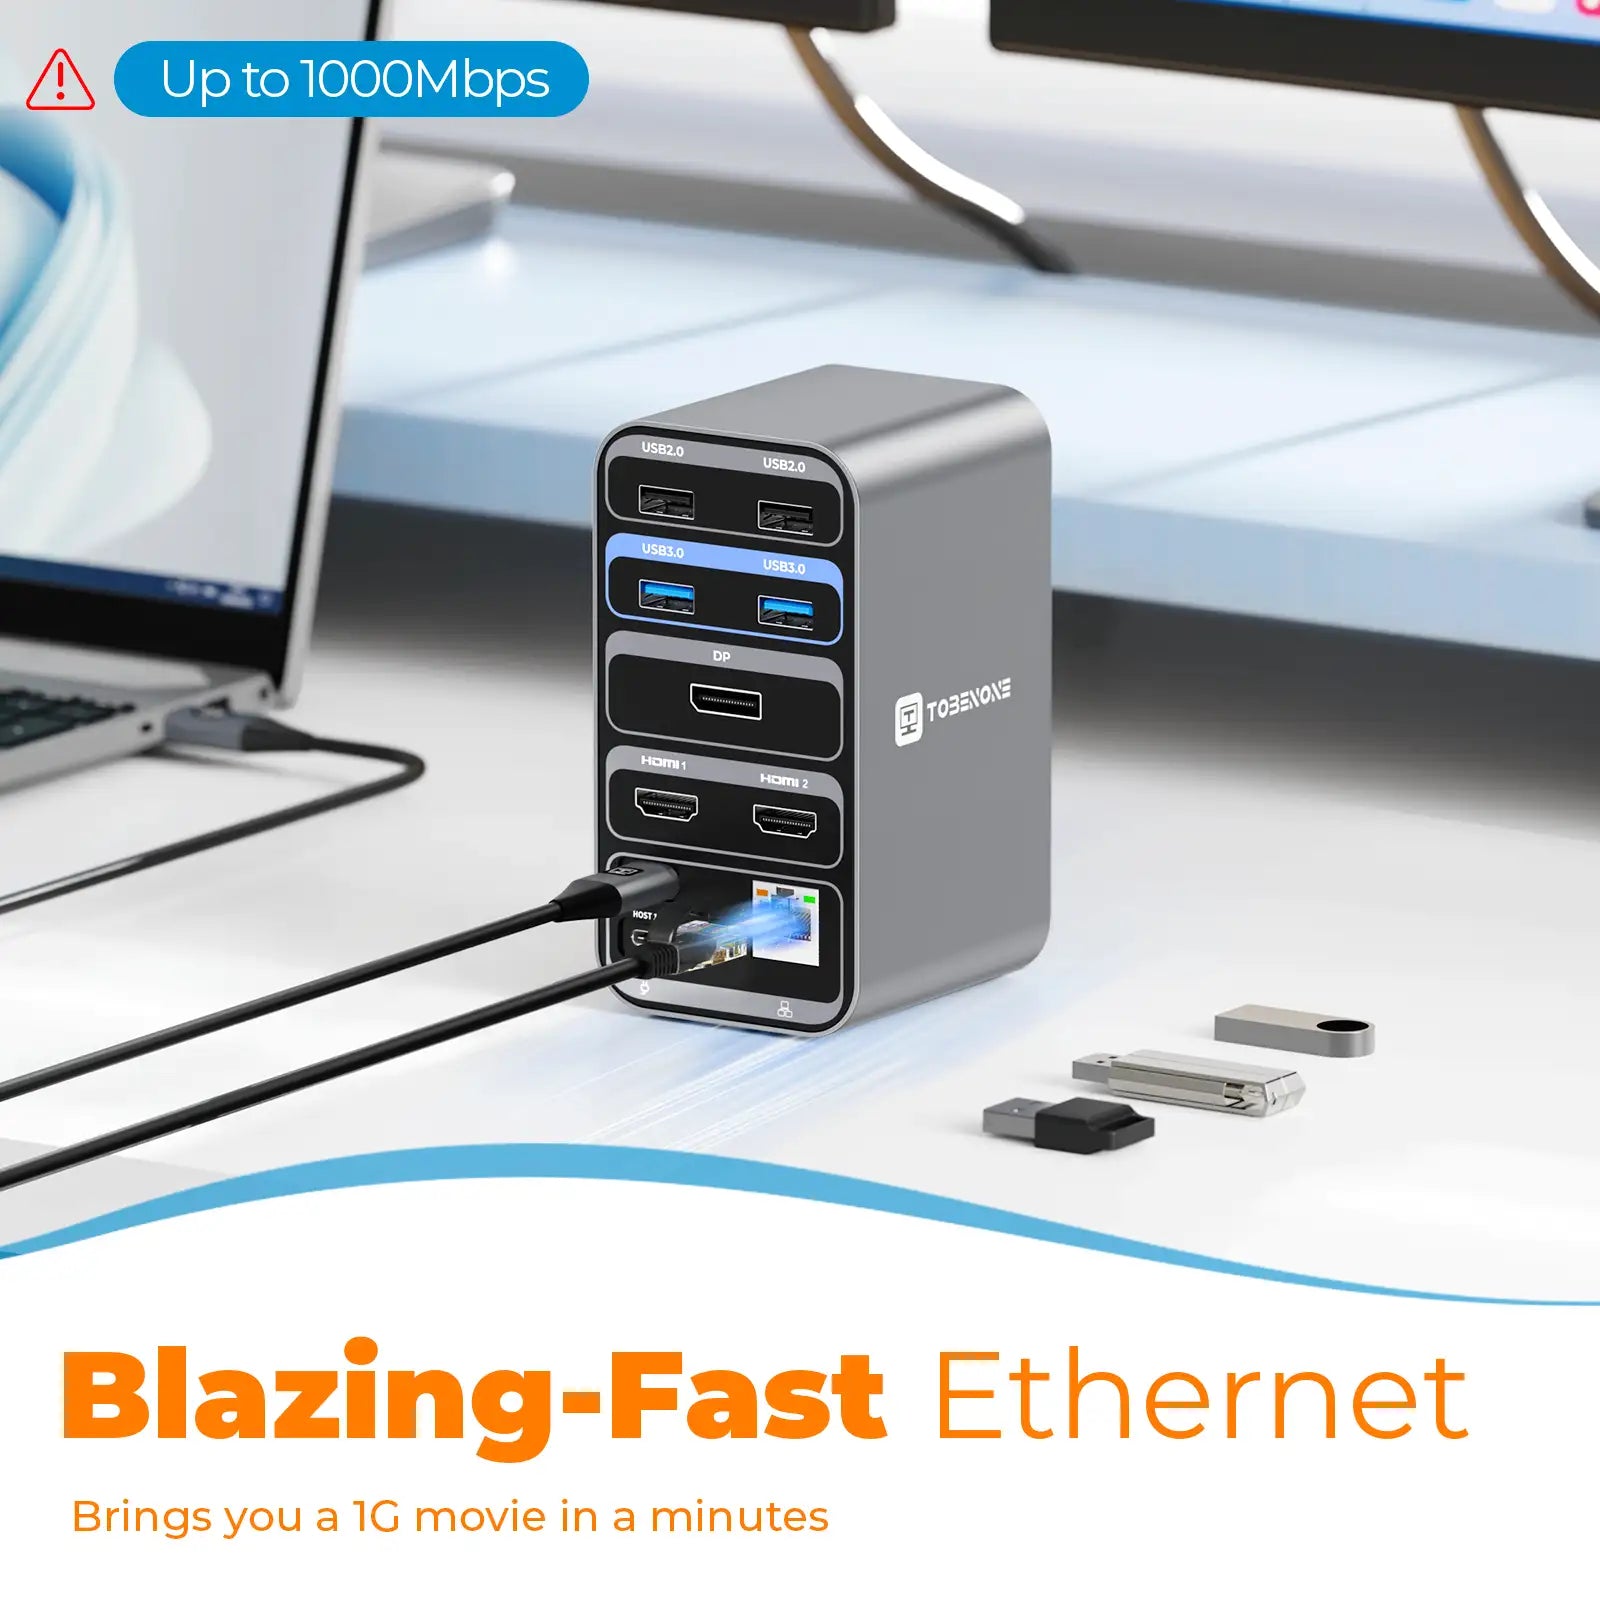 UDS18 Dual Monitor Docking Station quipped with a Fast and Stable Gigabit Ethernet